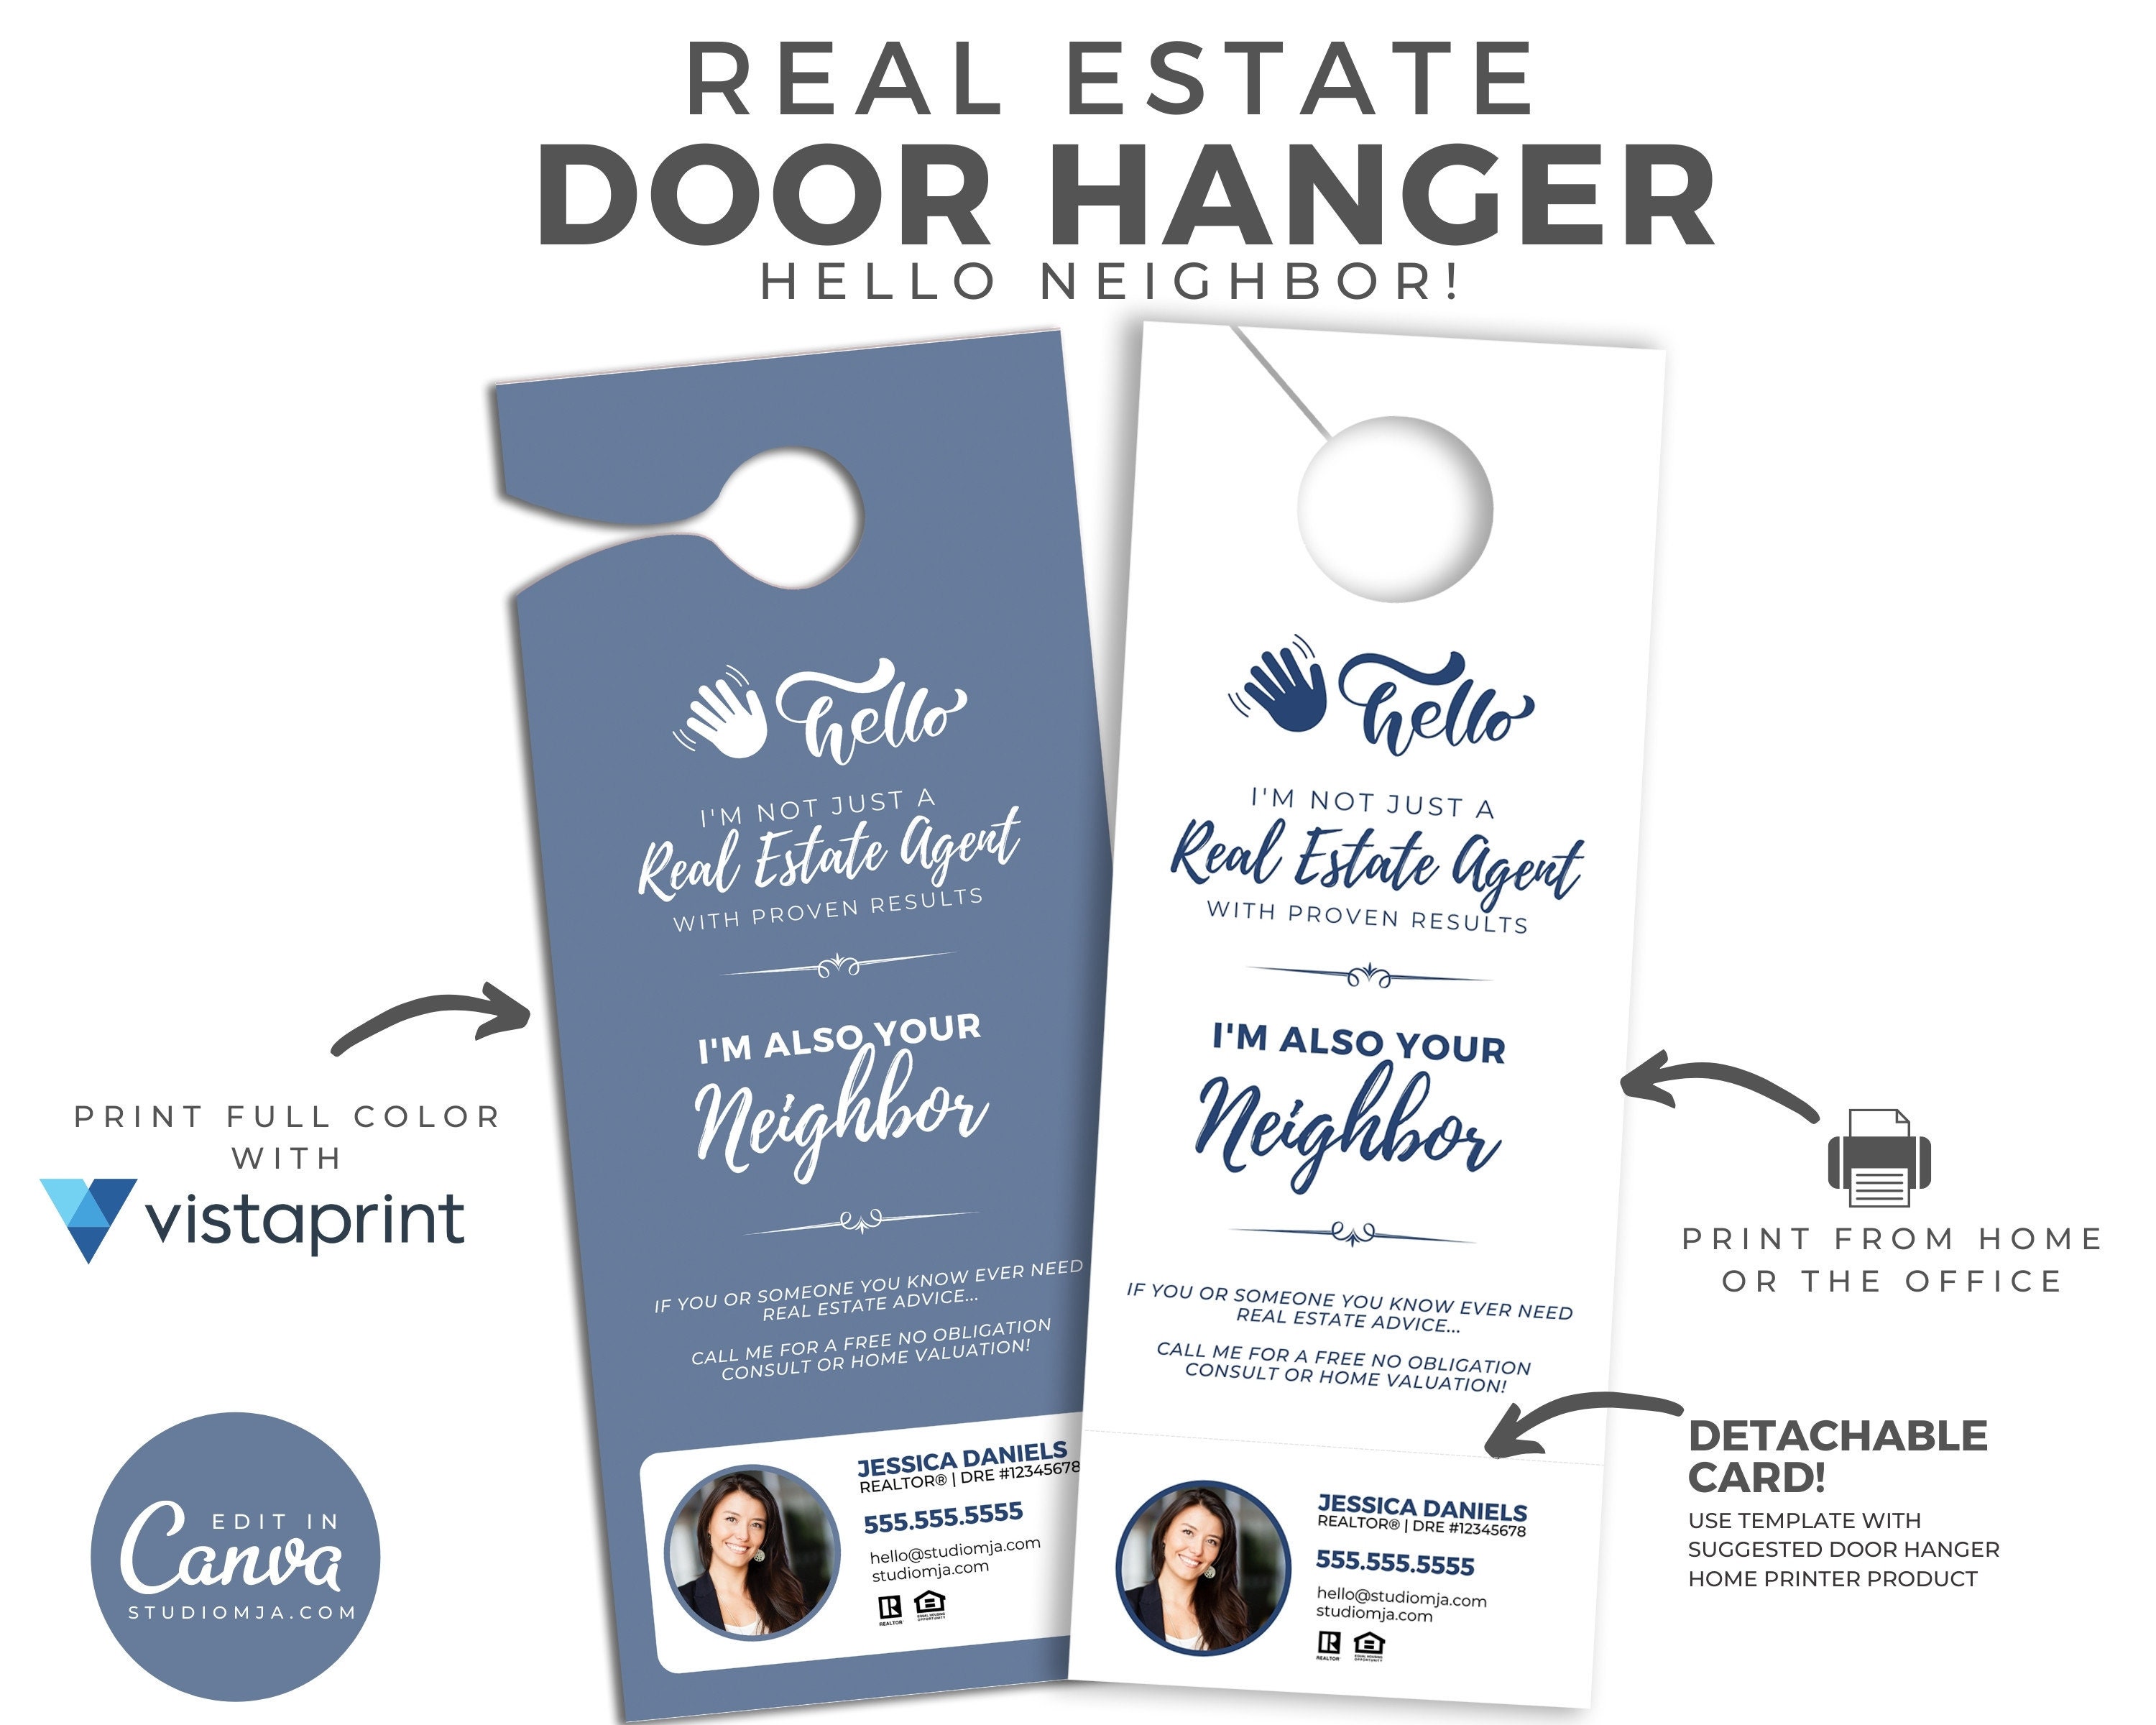  I'm not just a Real Estate Agent, I'm also your Neighbor, Door  Hanger